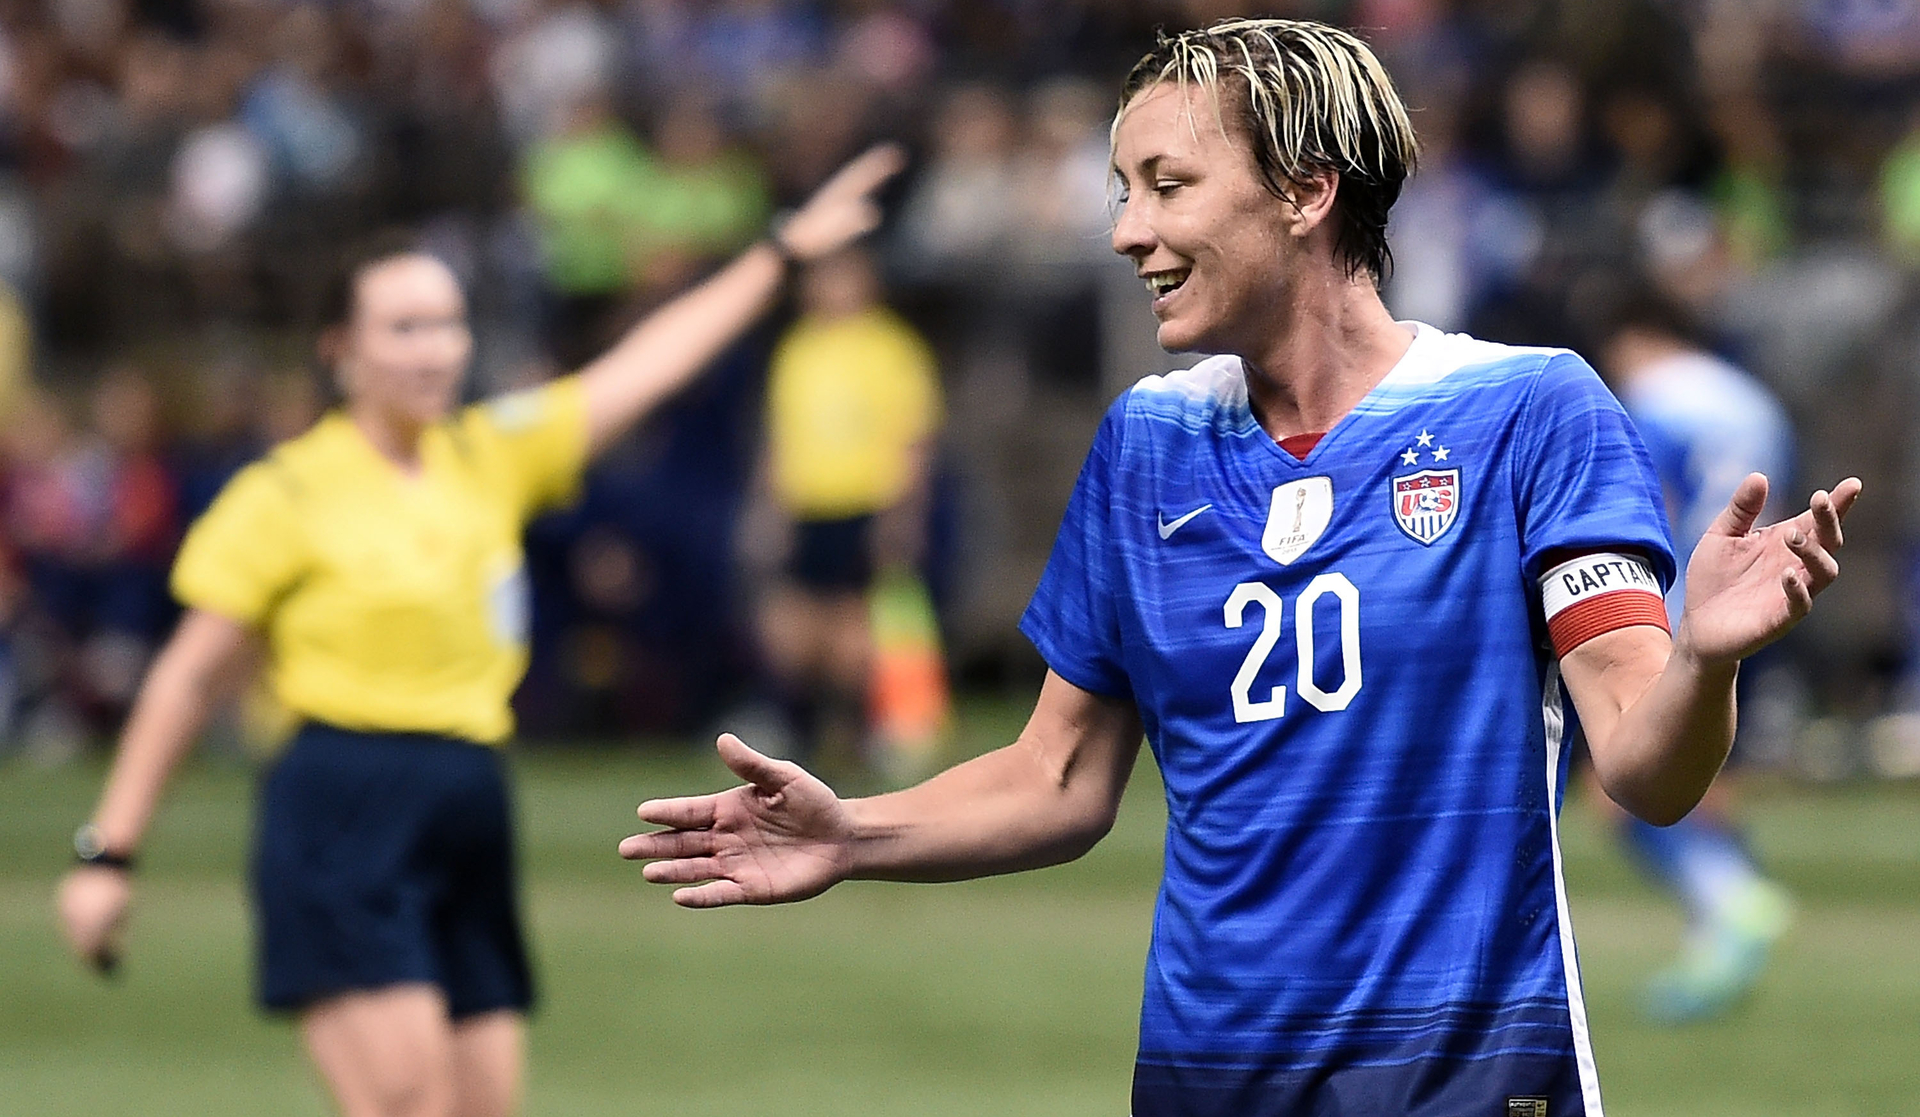 Abby Wambach's career ends with hugs and ovations from USWNT teammates